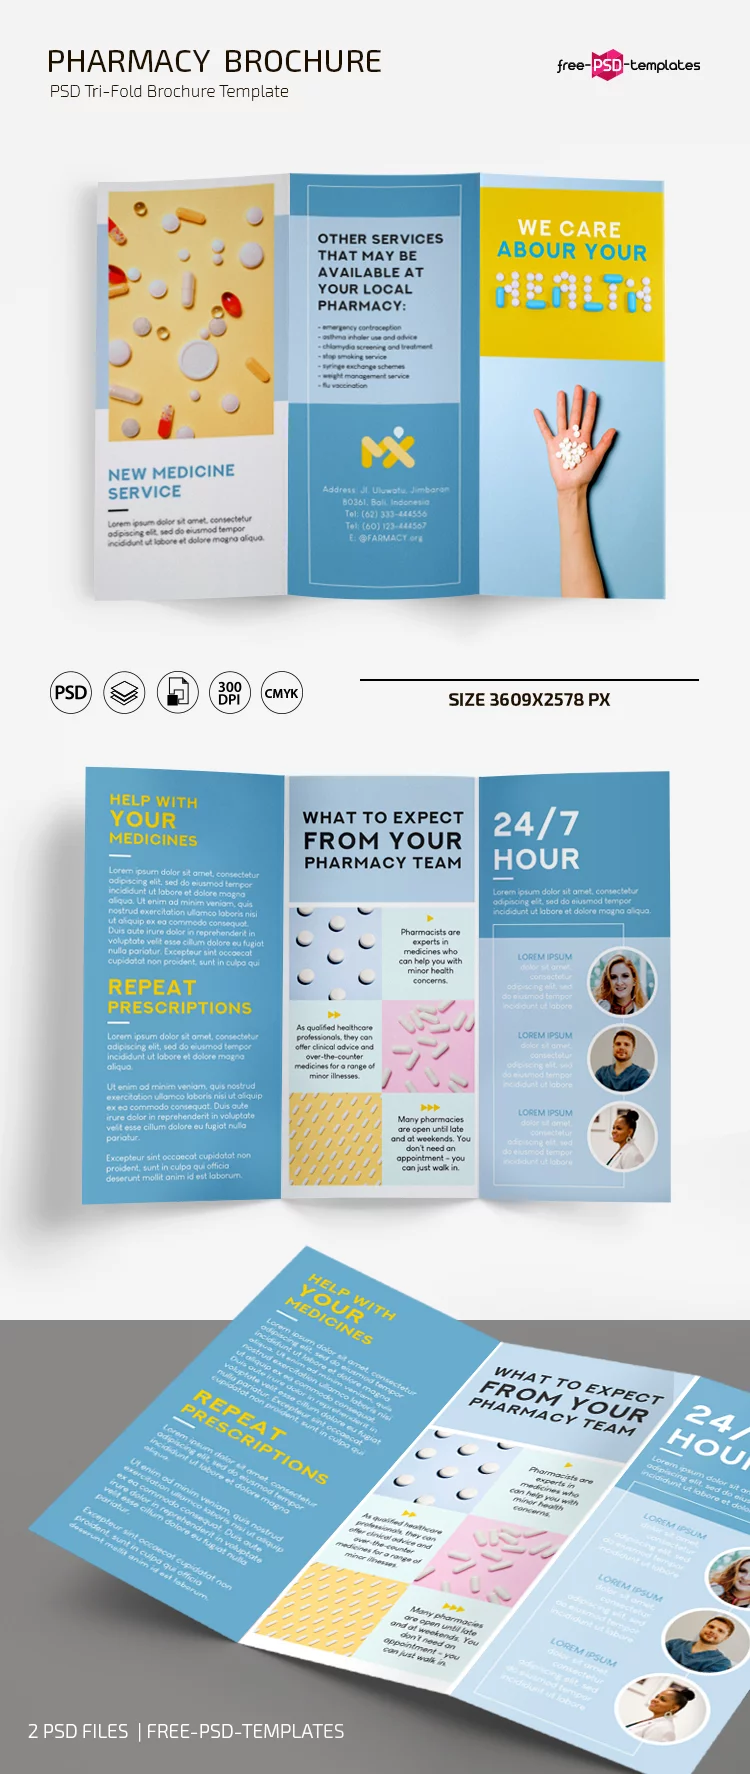 Free Pharmacy Brochure Template in PSD + AI